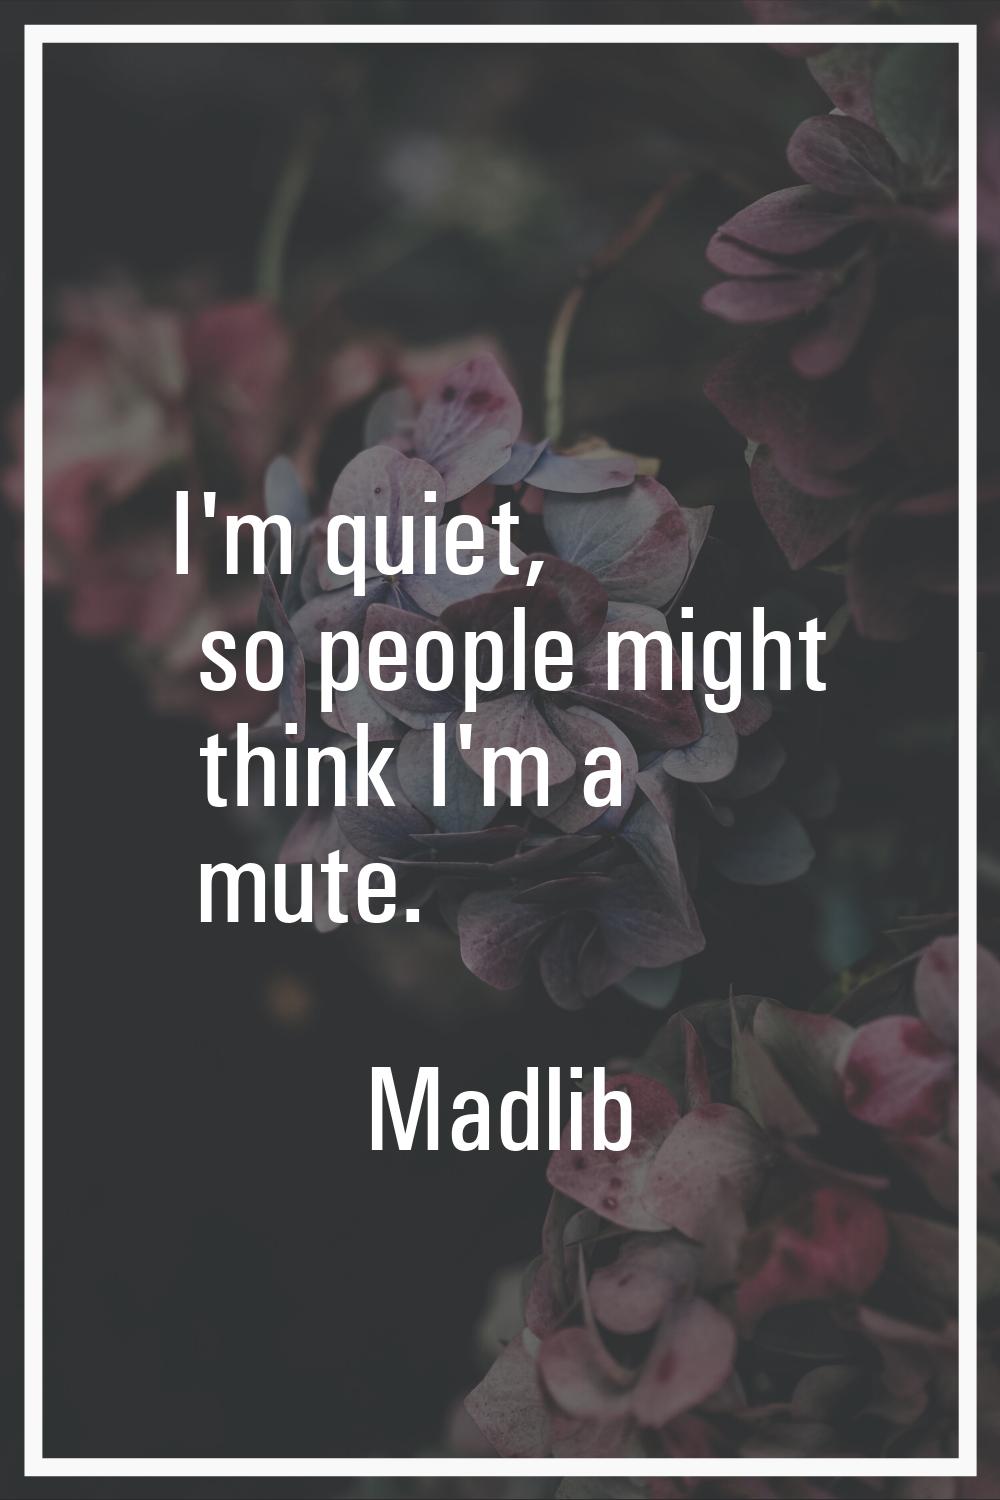 I'm quiet, so people might think I'm a mute.